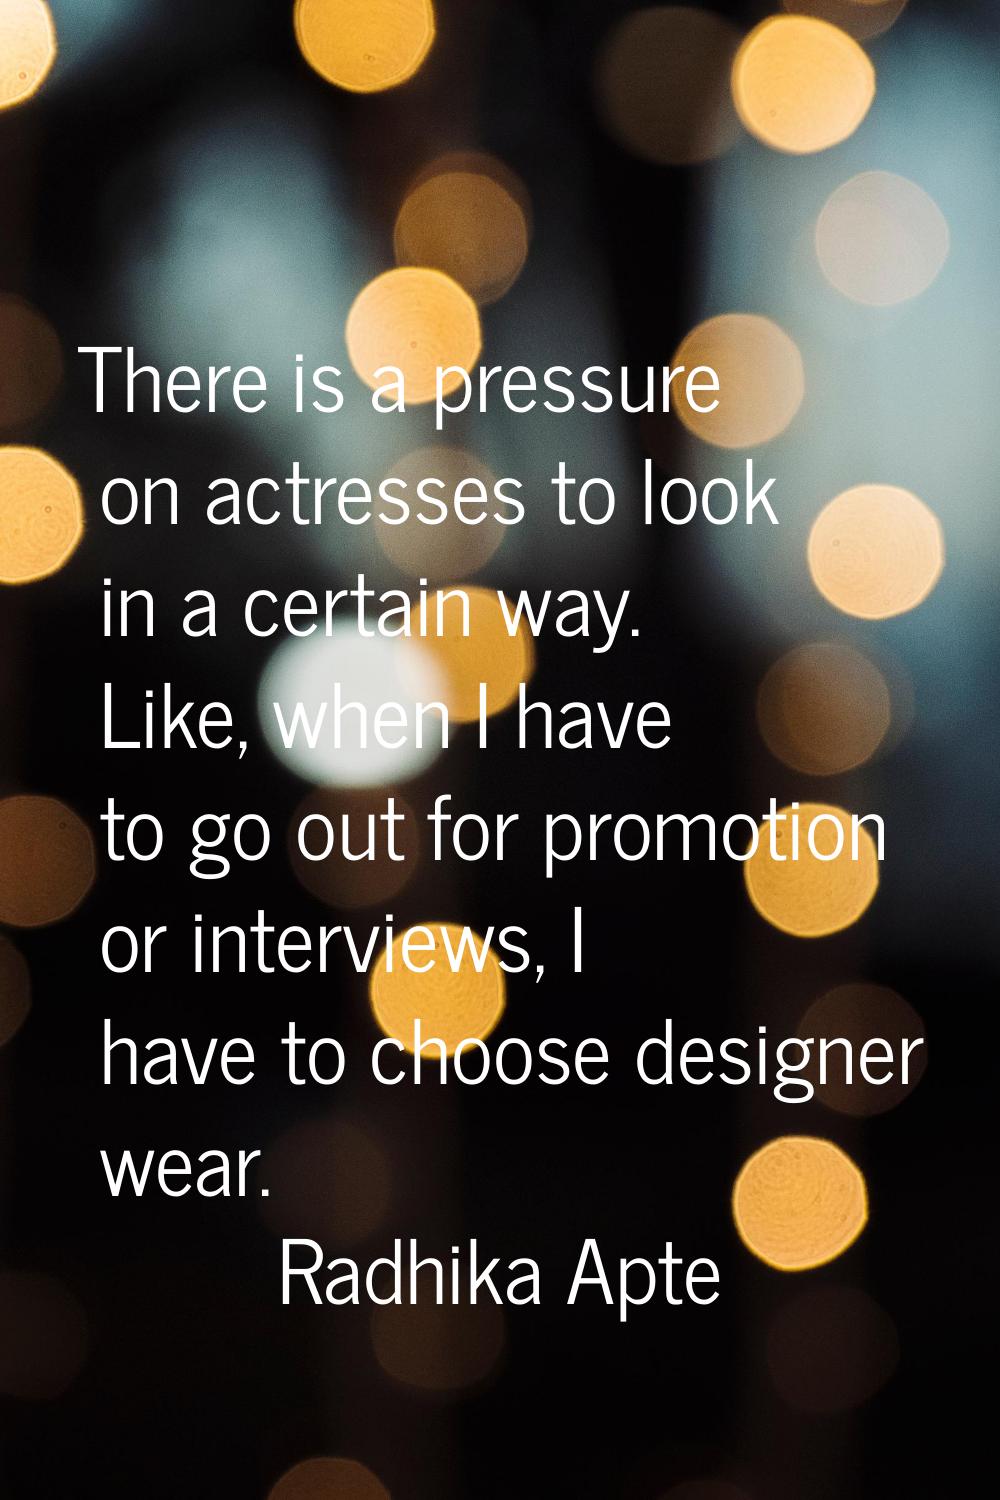 There is a pressure on actresses to look in a certain way. Like, when I have to go out for promotio